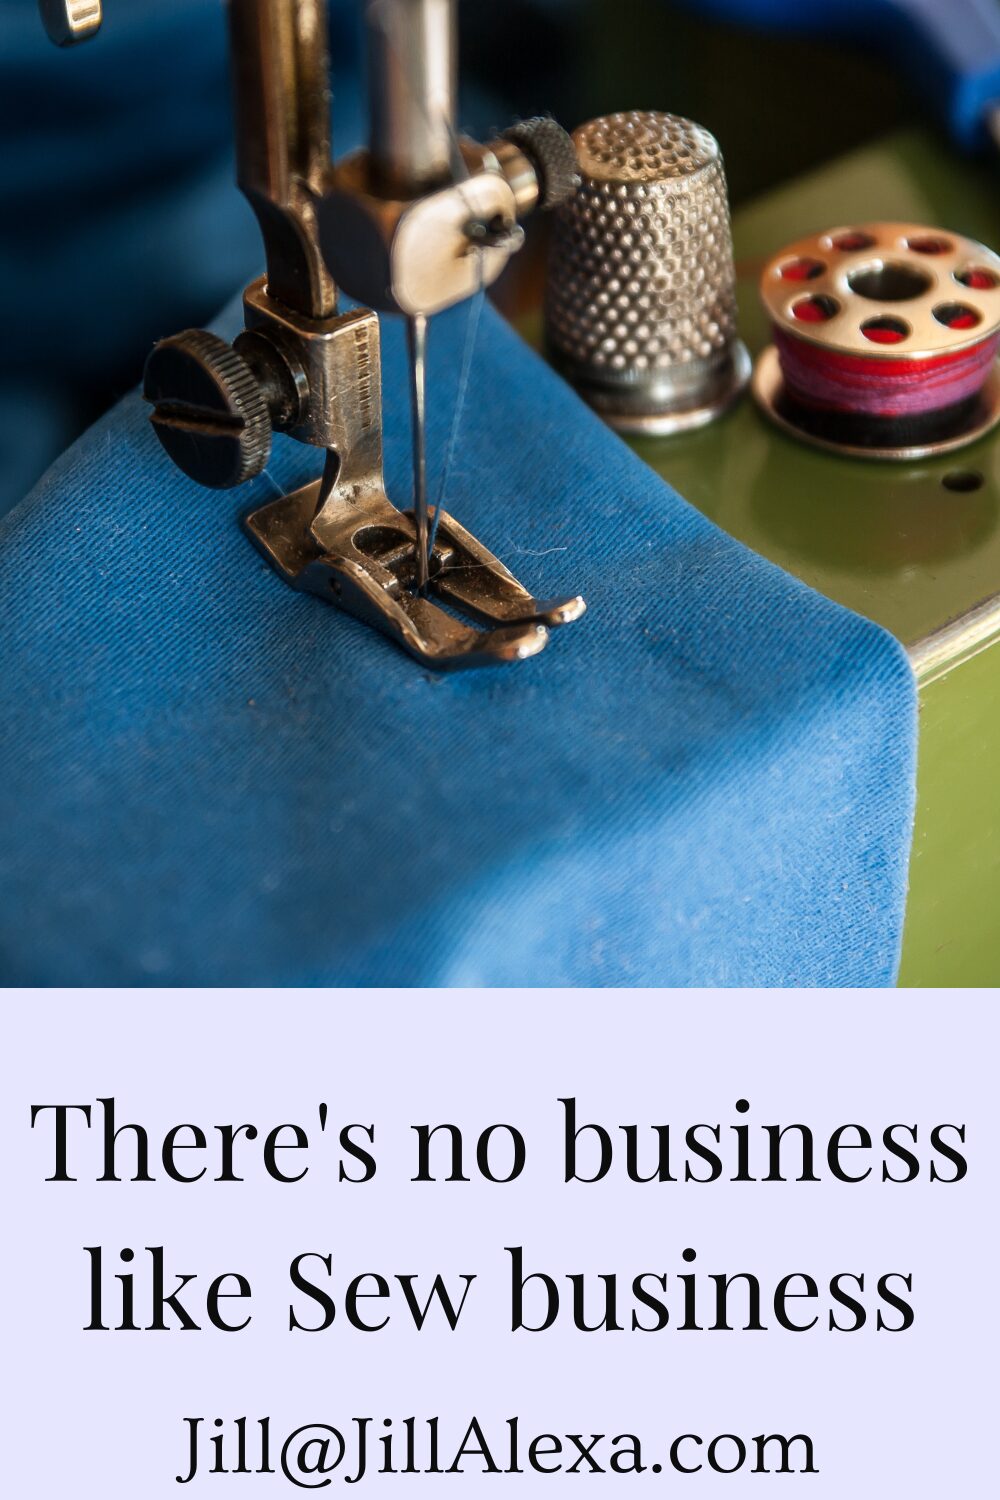 There's no business like Sew business | Theres no business like Sew business 1